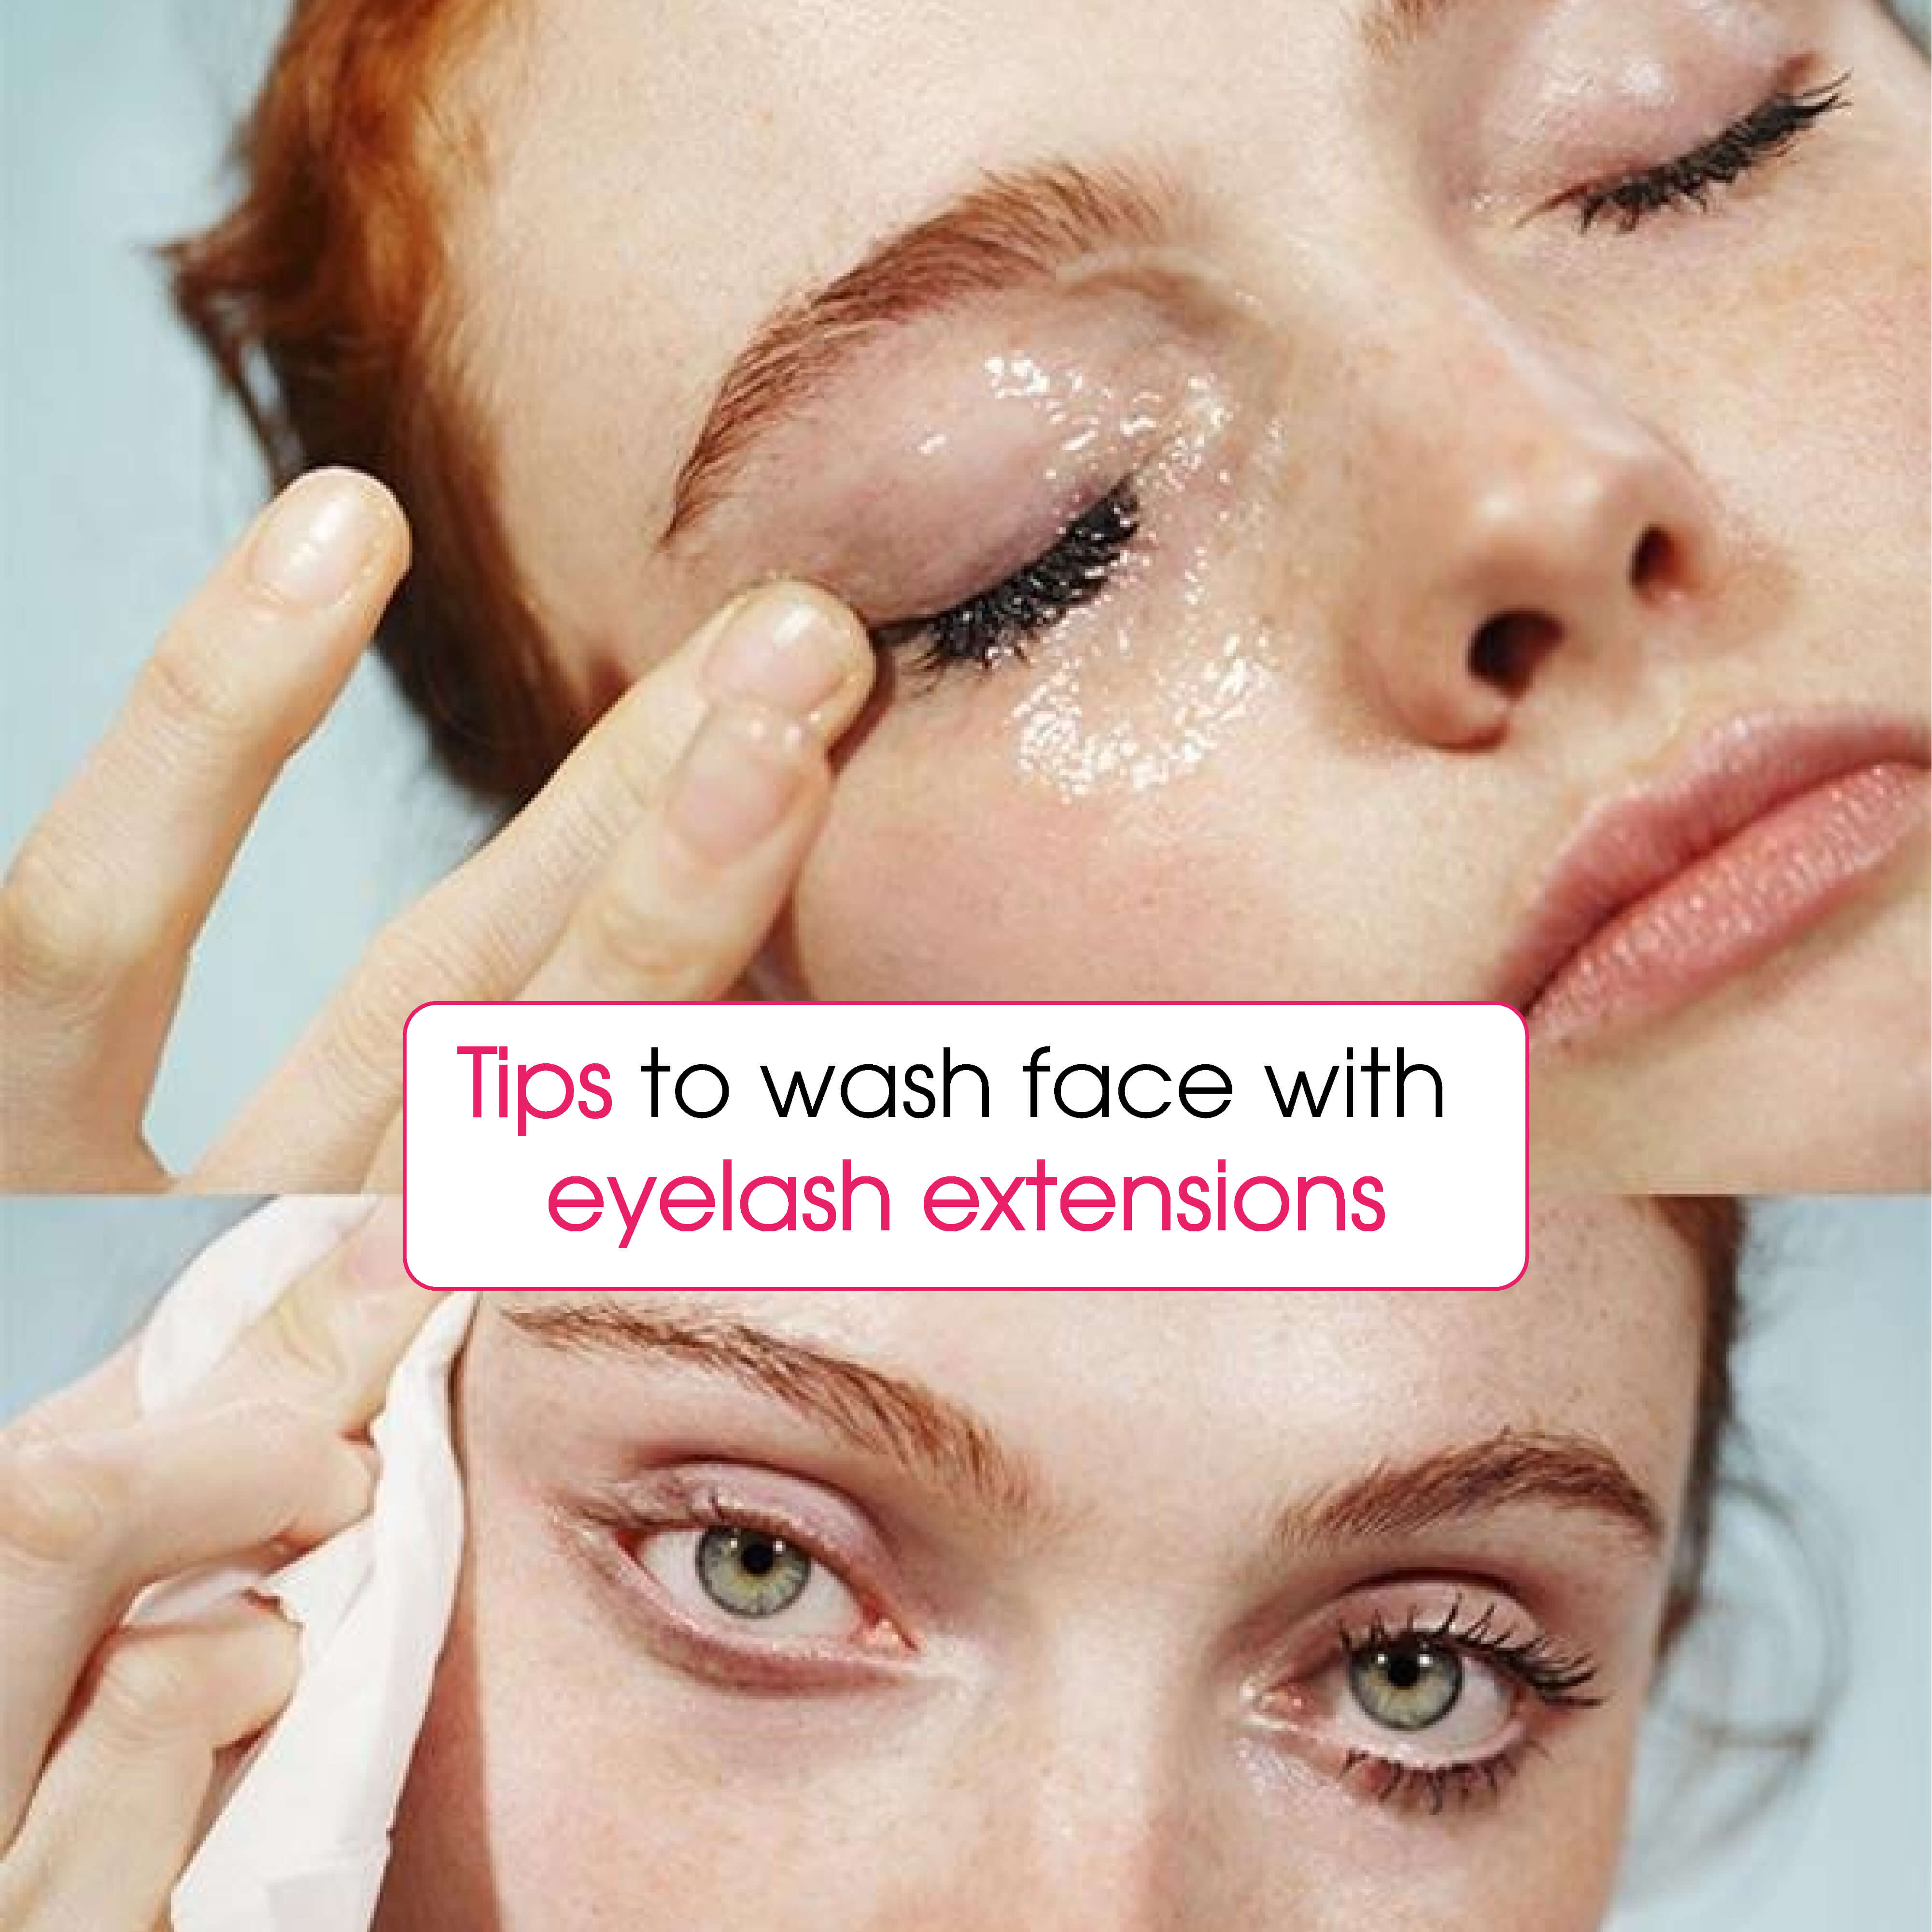 Tips to wash face with eyelash extensions